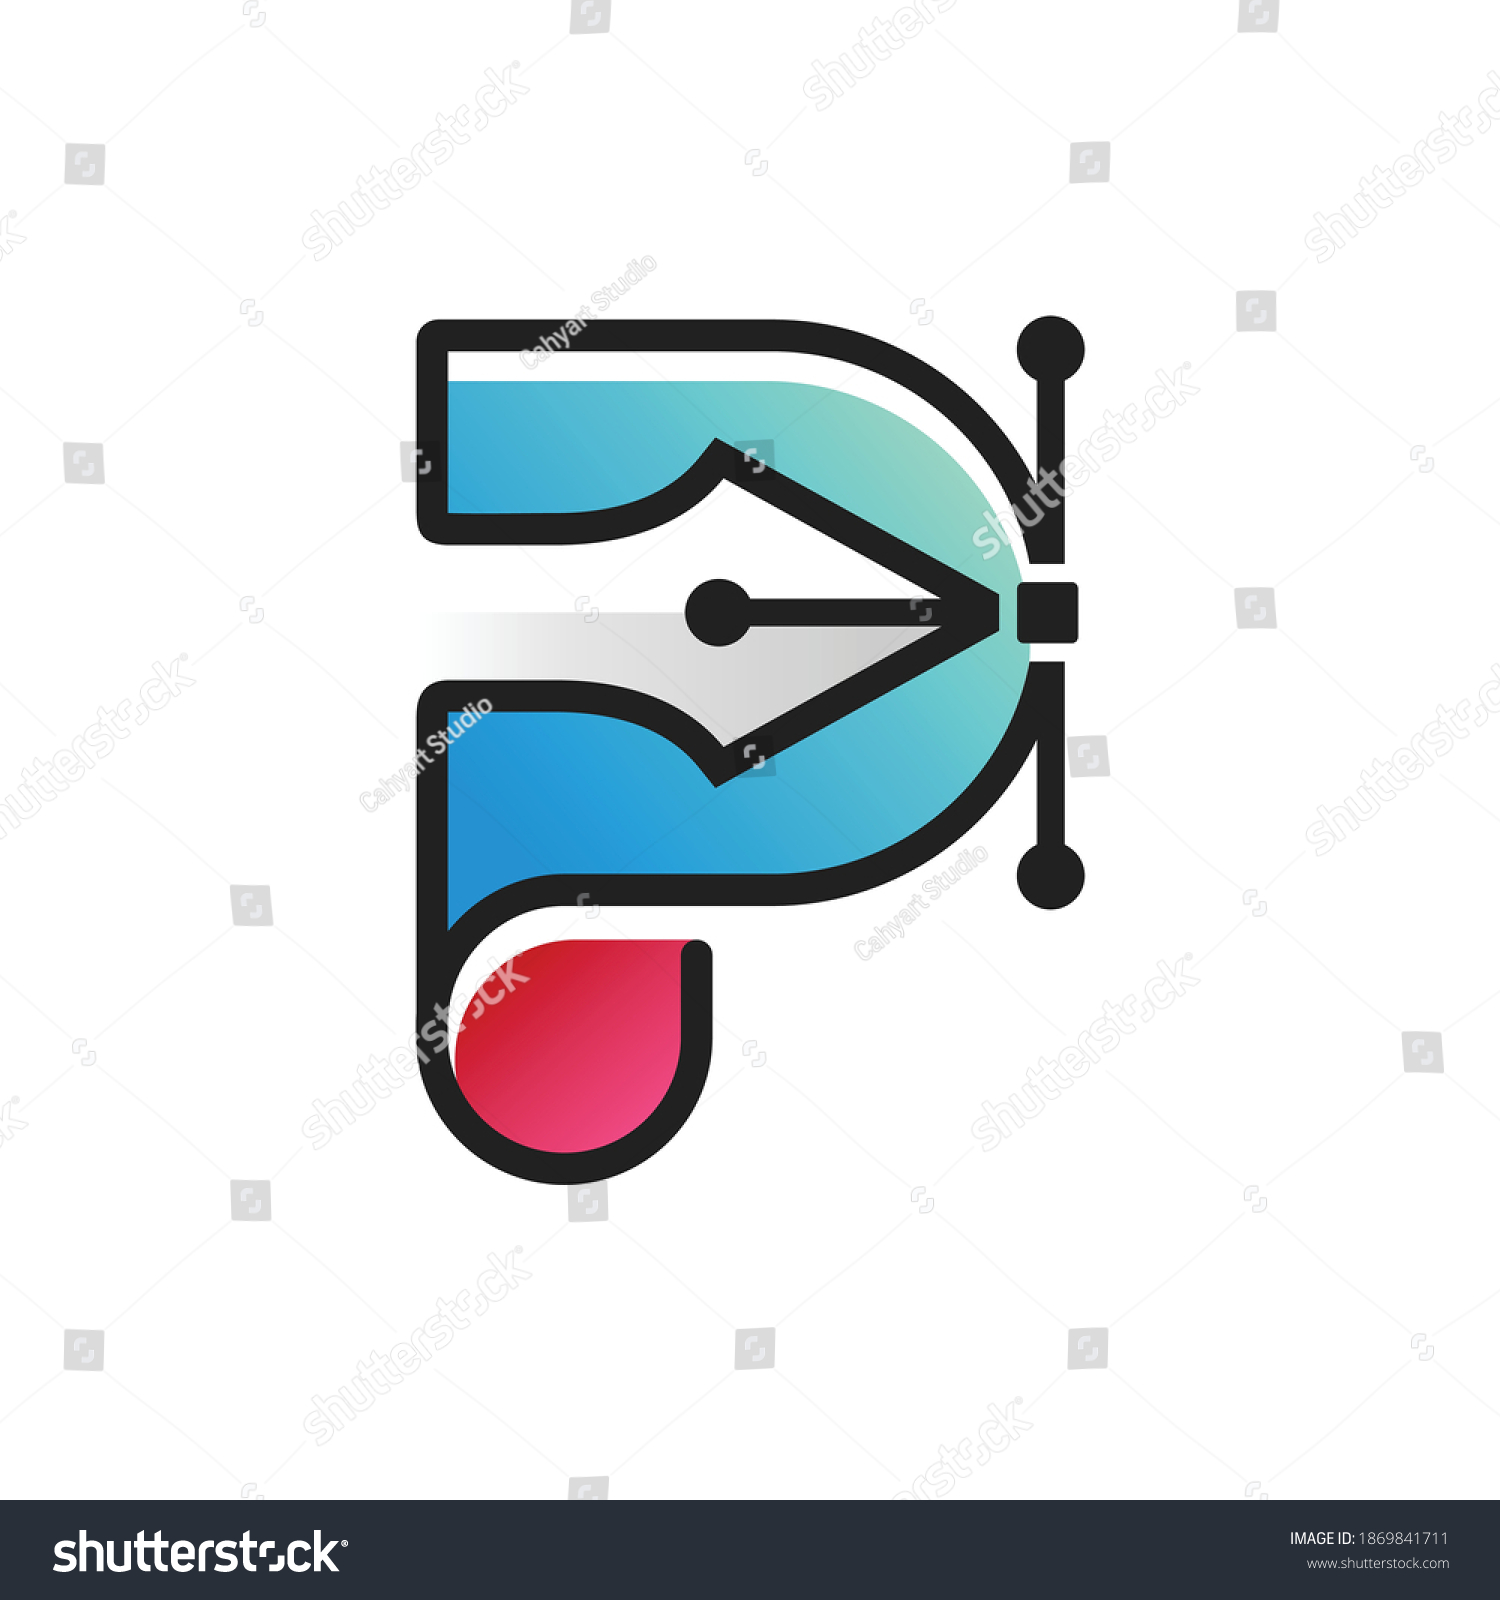 SVG of pen tool silhouette icon on letter P. letter P with pen tool logo illustration  svg